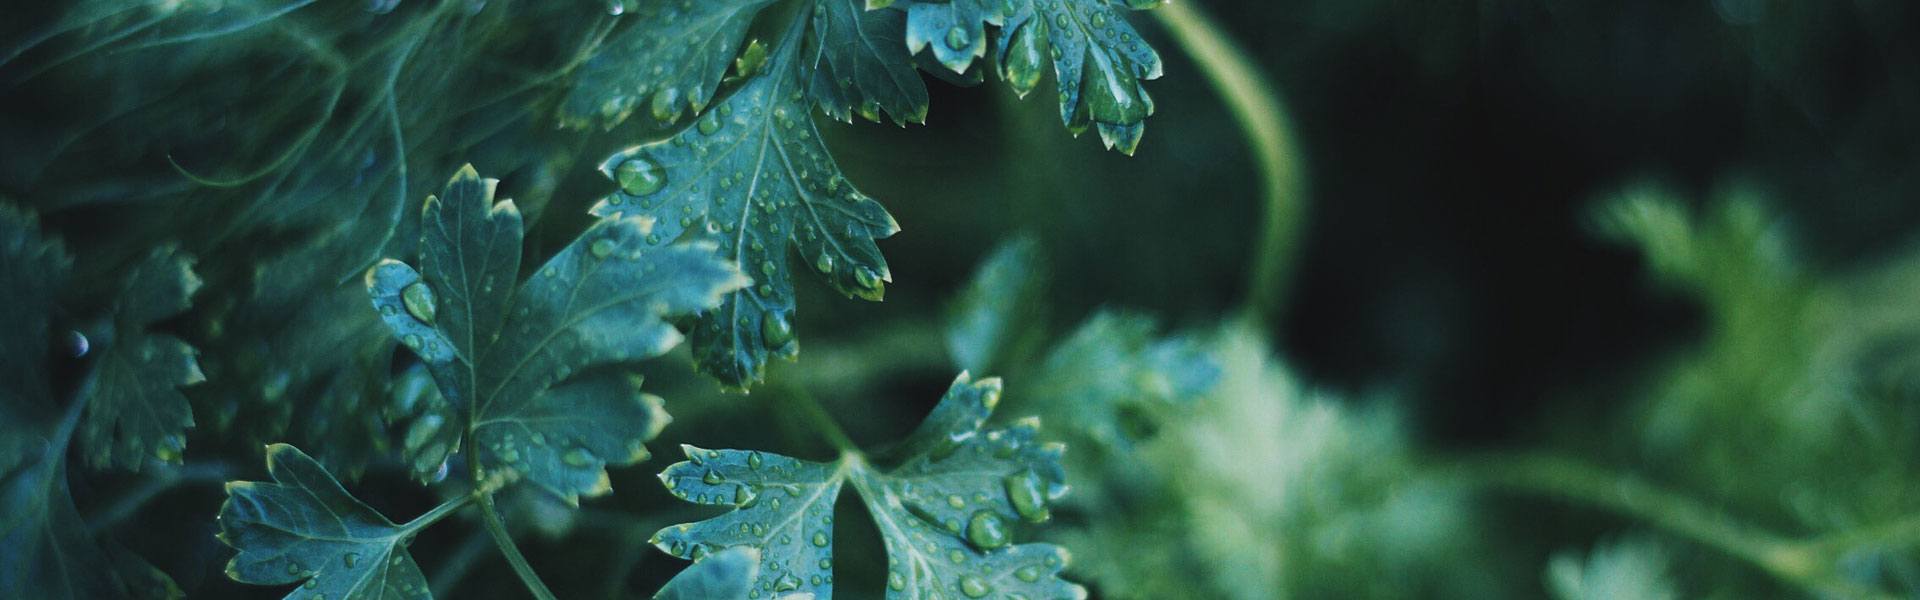 Droplets of water sit on a several green leaves